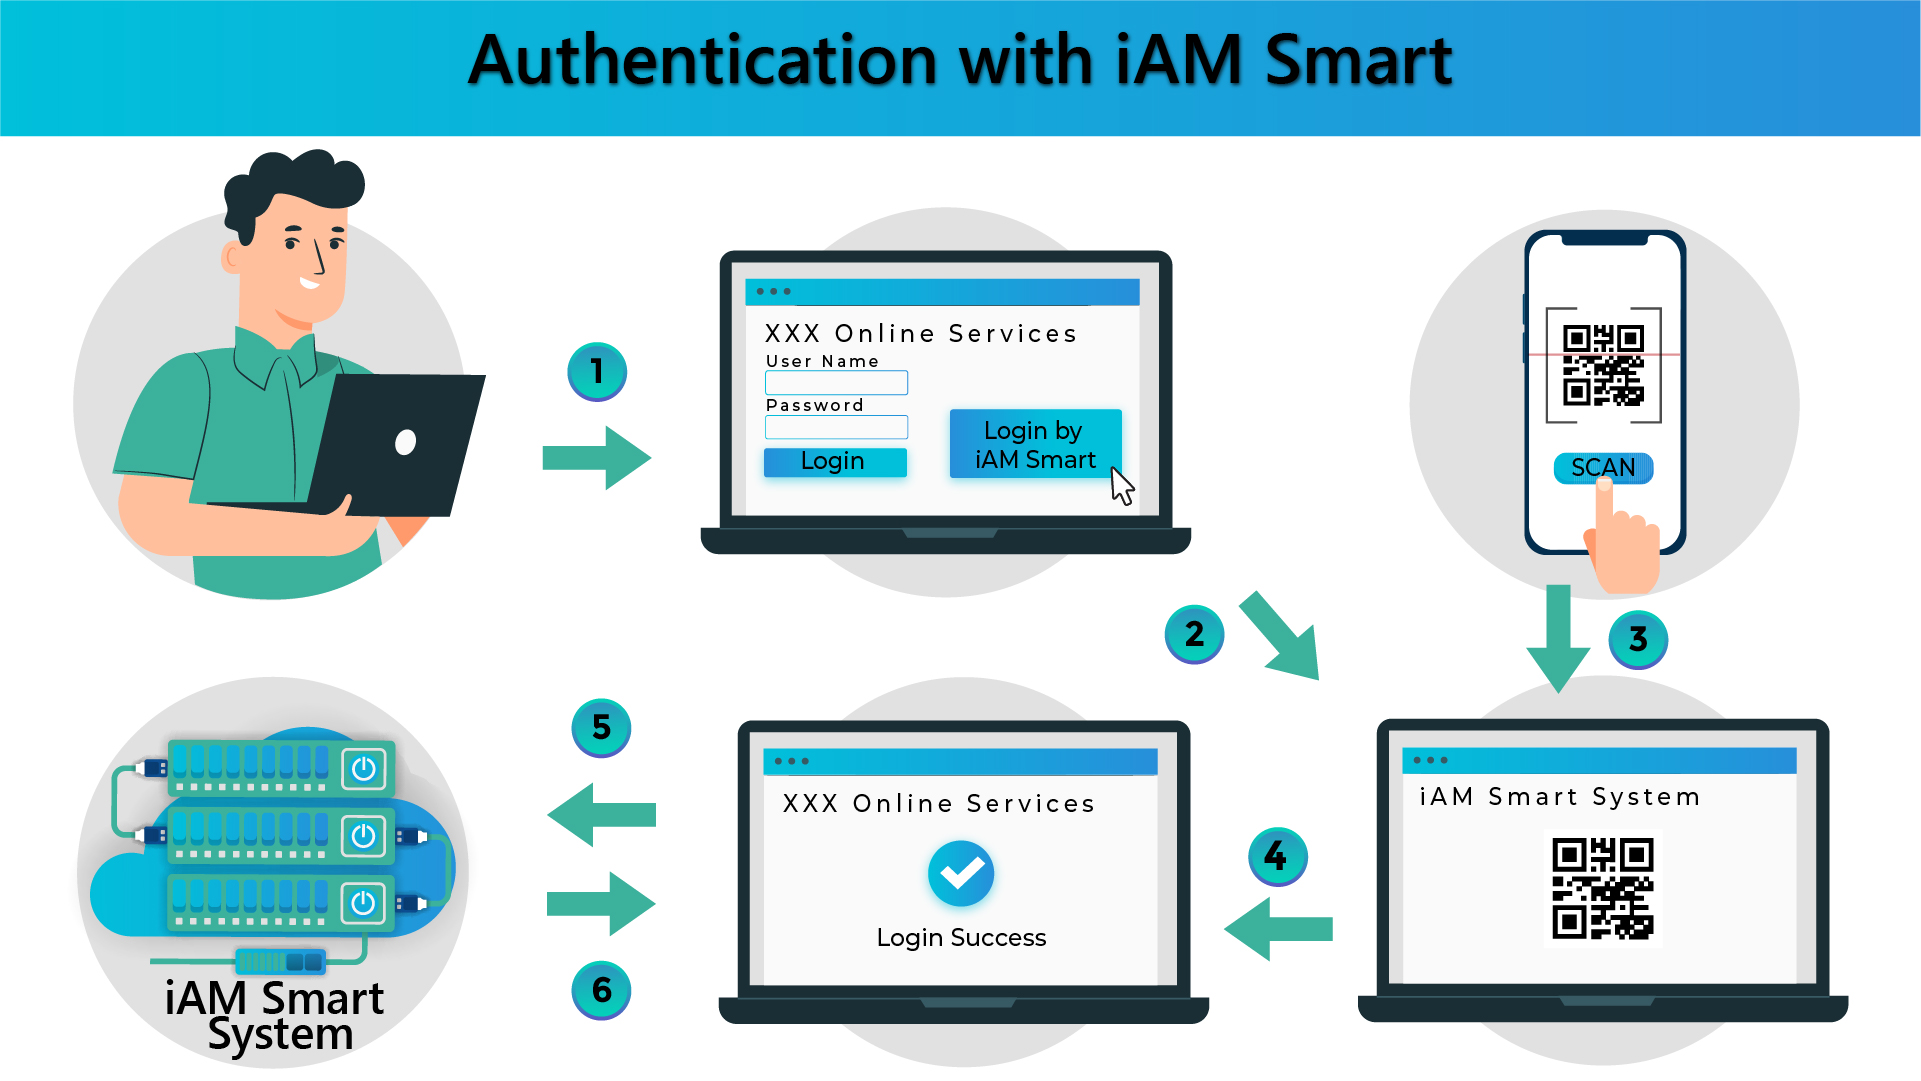 Authentication with "iAM Smart"